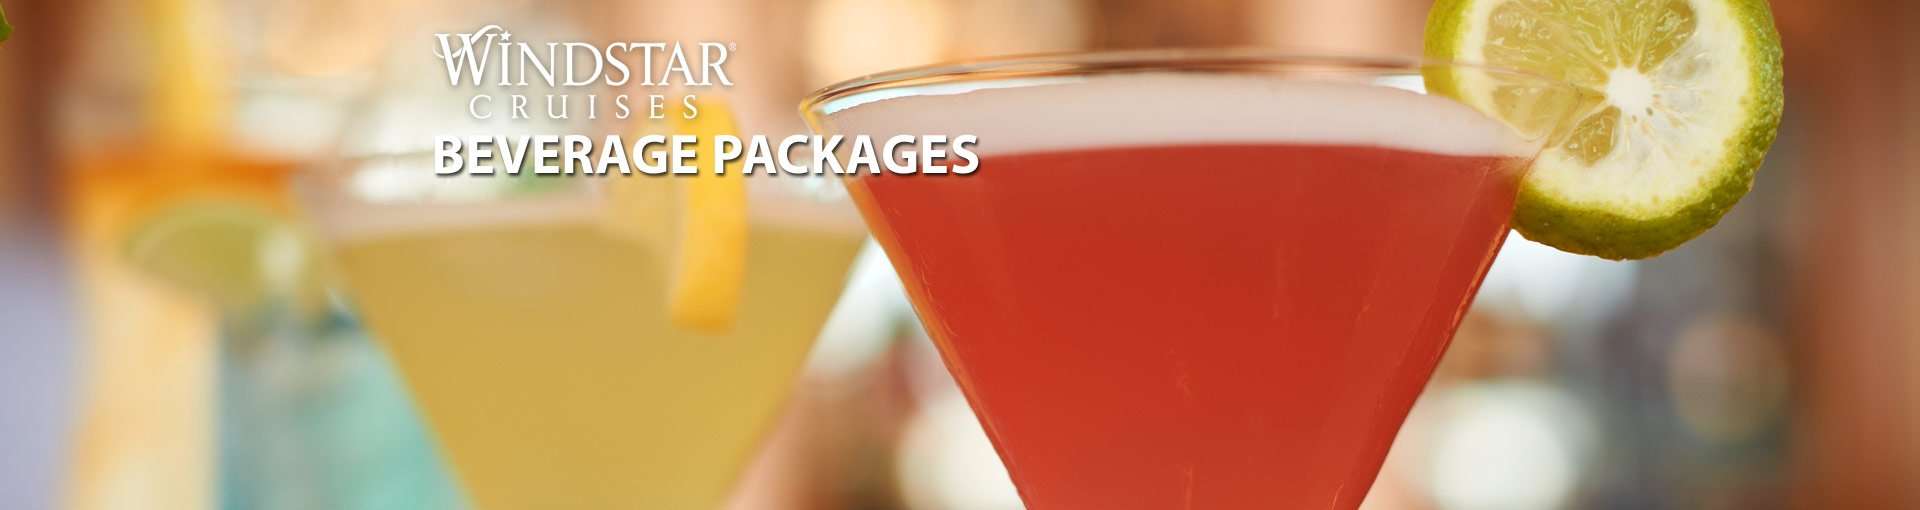 Windstar Cruises Drink Packages